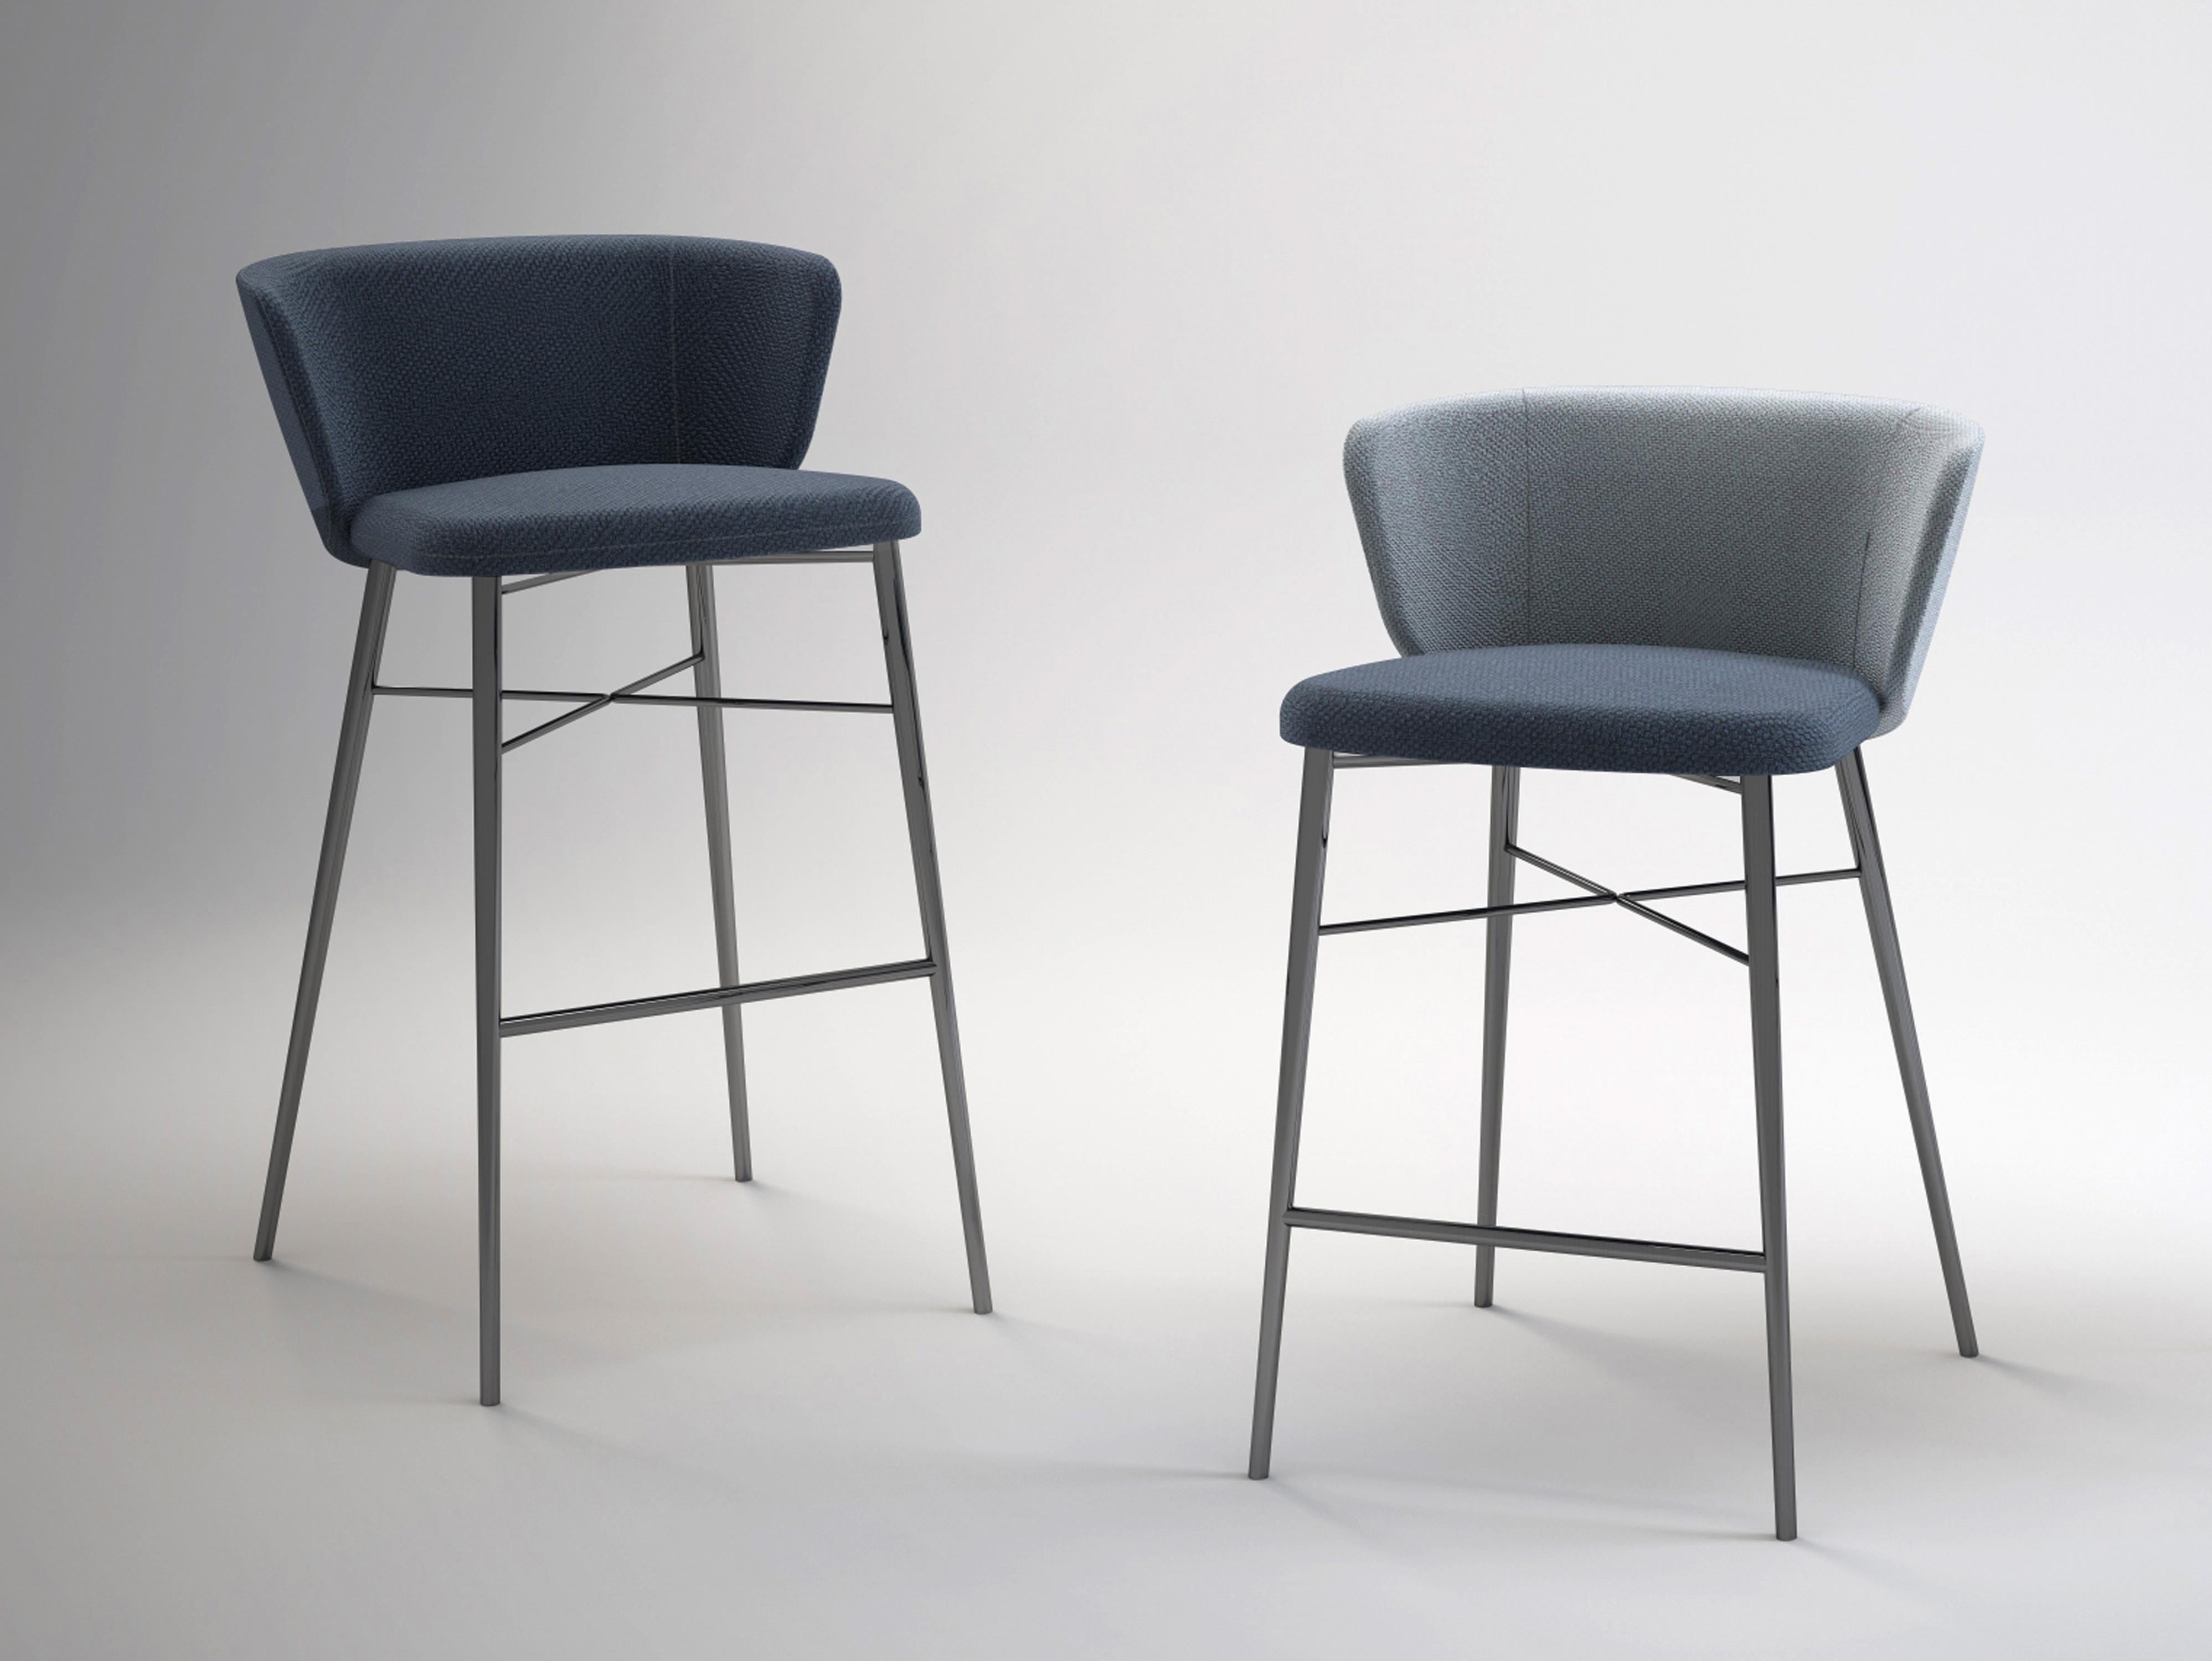 The Kin chair takes inspiration from the Japanese Kintsugi technique, which tends to embrace the value of breakages rather than seeking to conceal them. Reflecting the Japanese tradition, designers Radice and Orlandini have taken the different parts